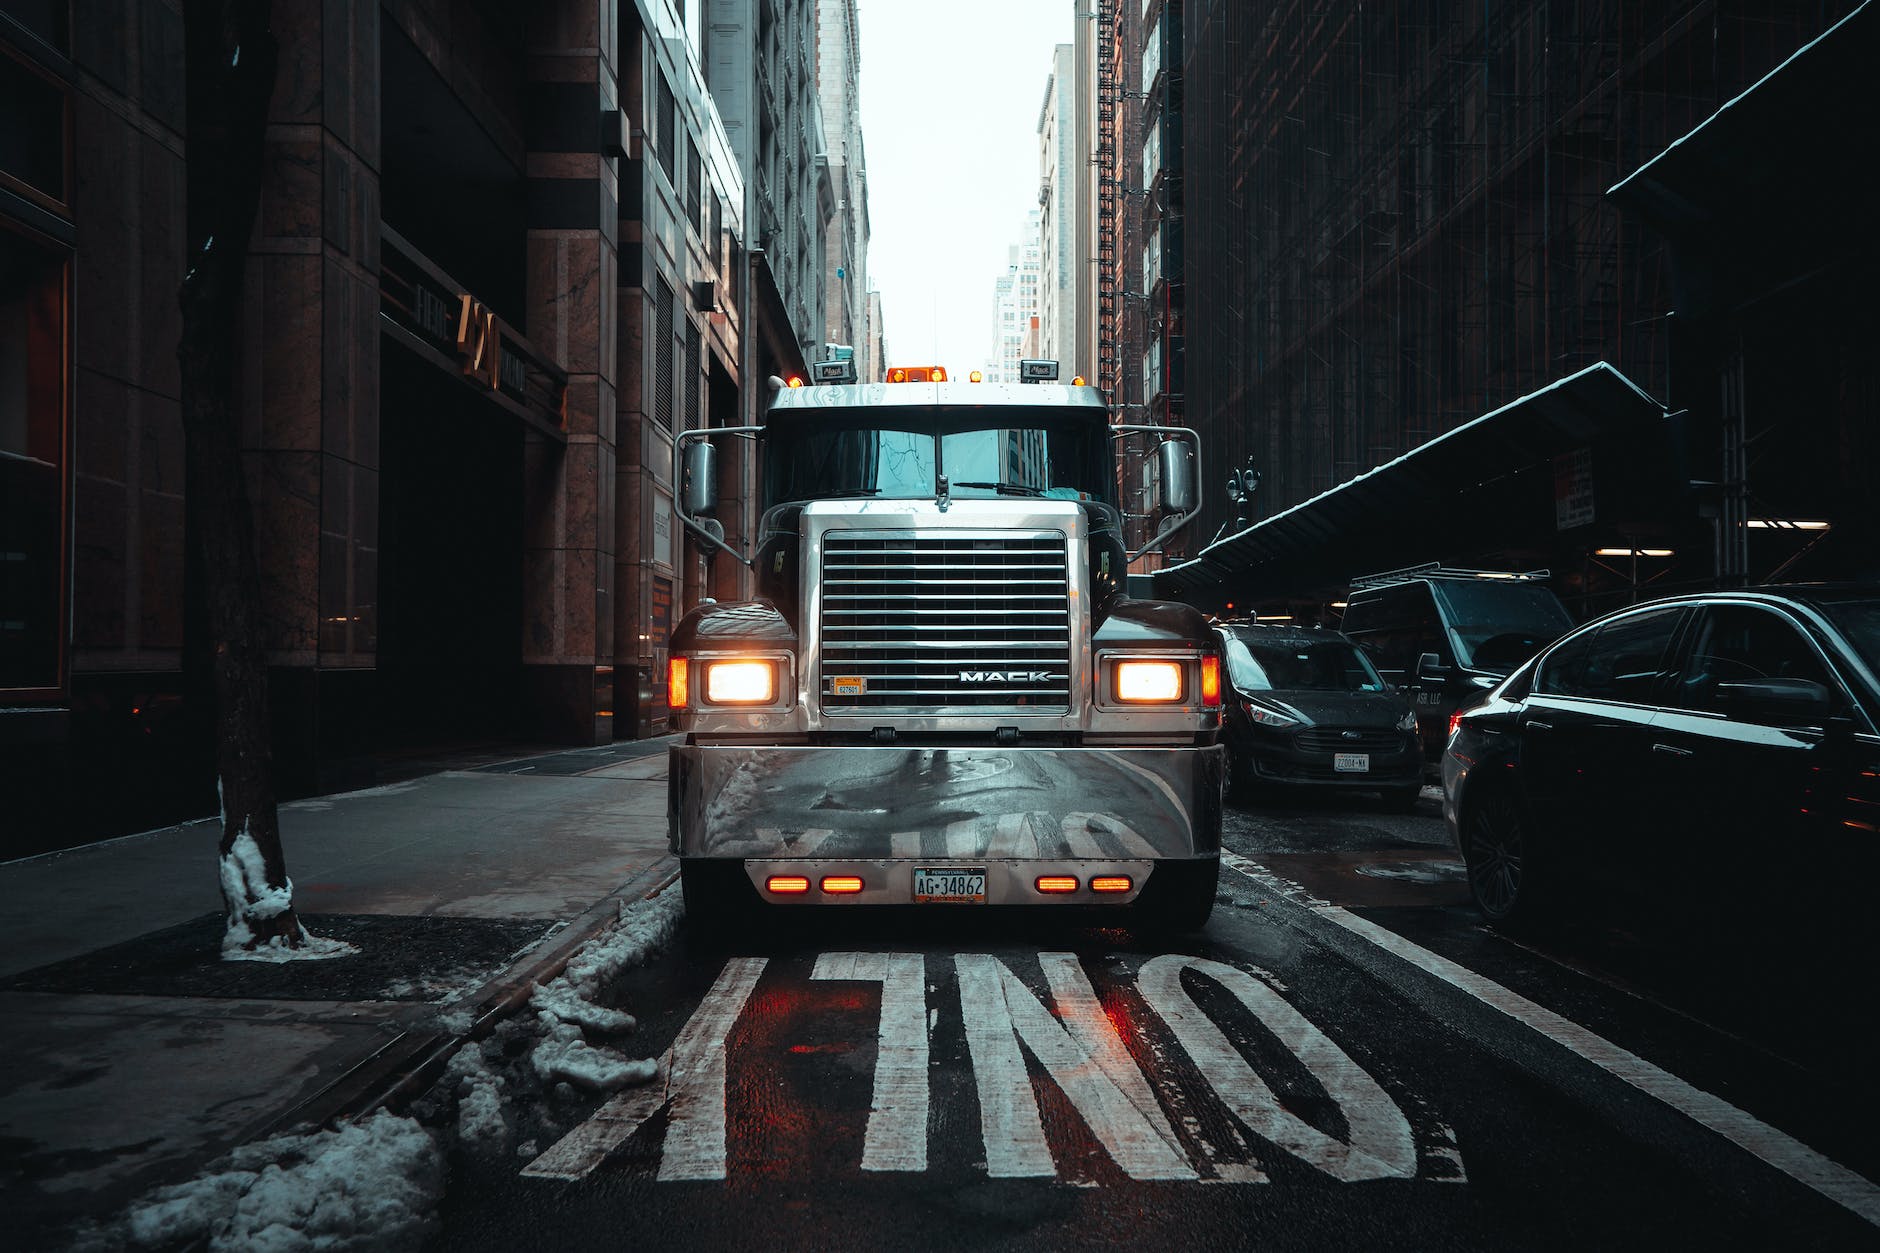 truck in a narrow alley in new york